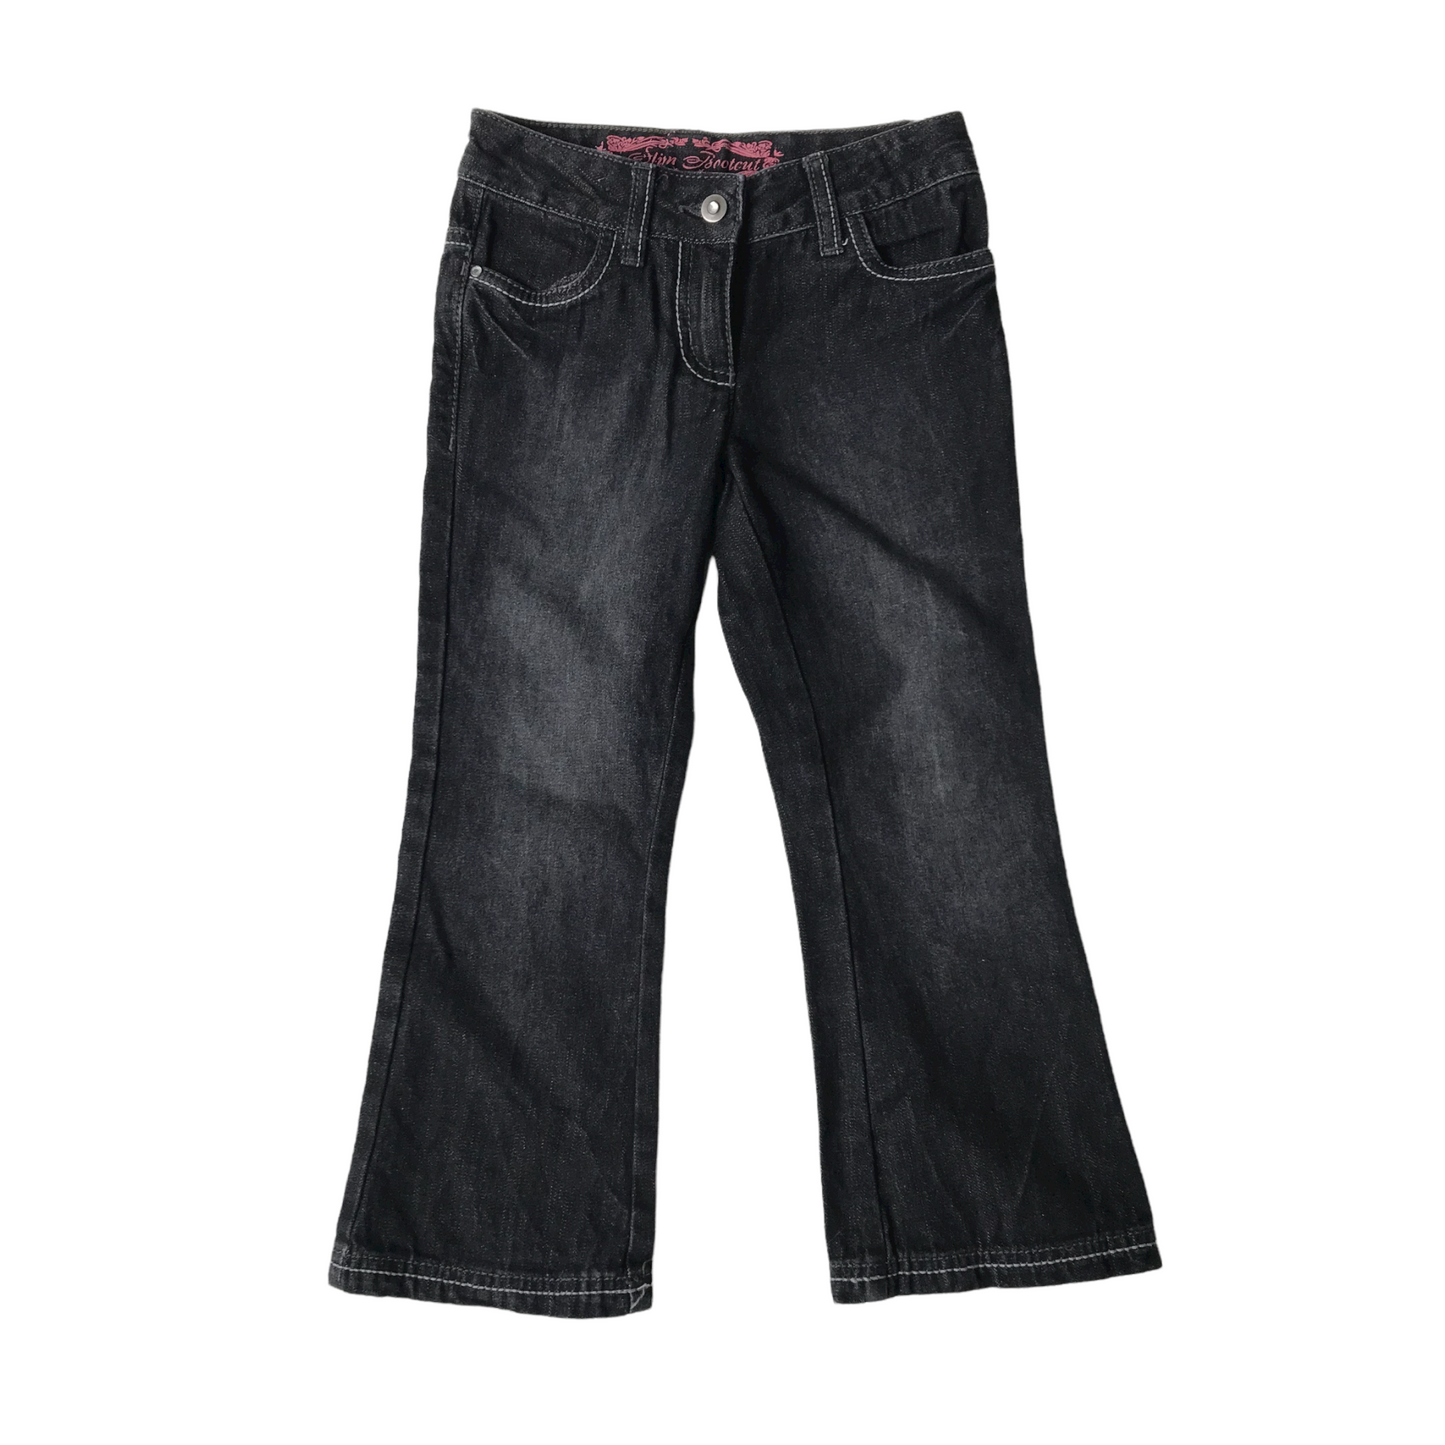 George Washed-out Black Jeans with Slight Flare Age 4